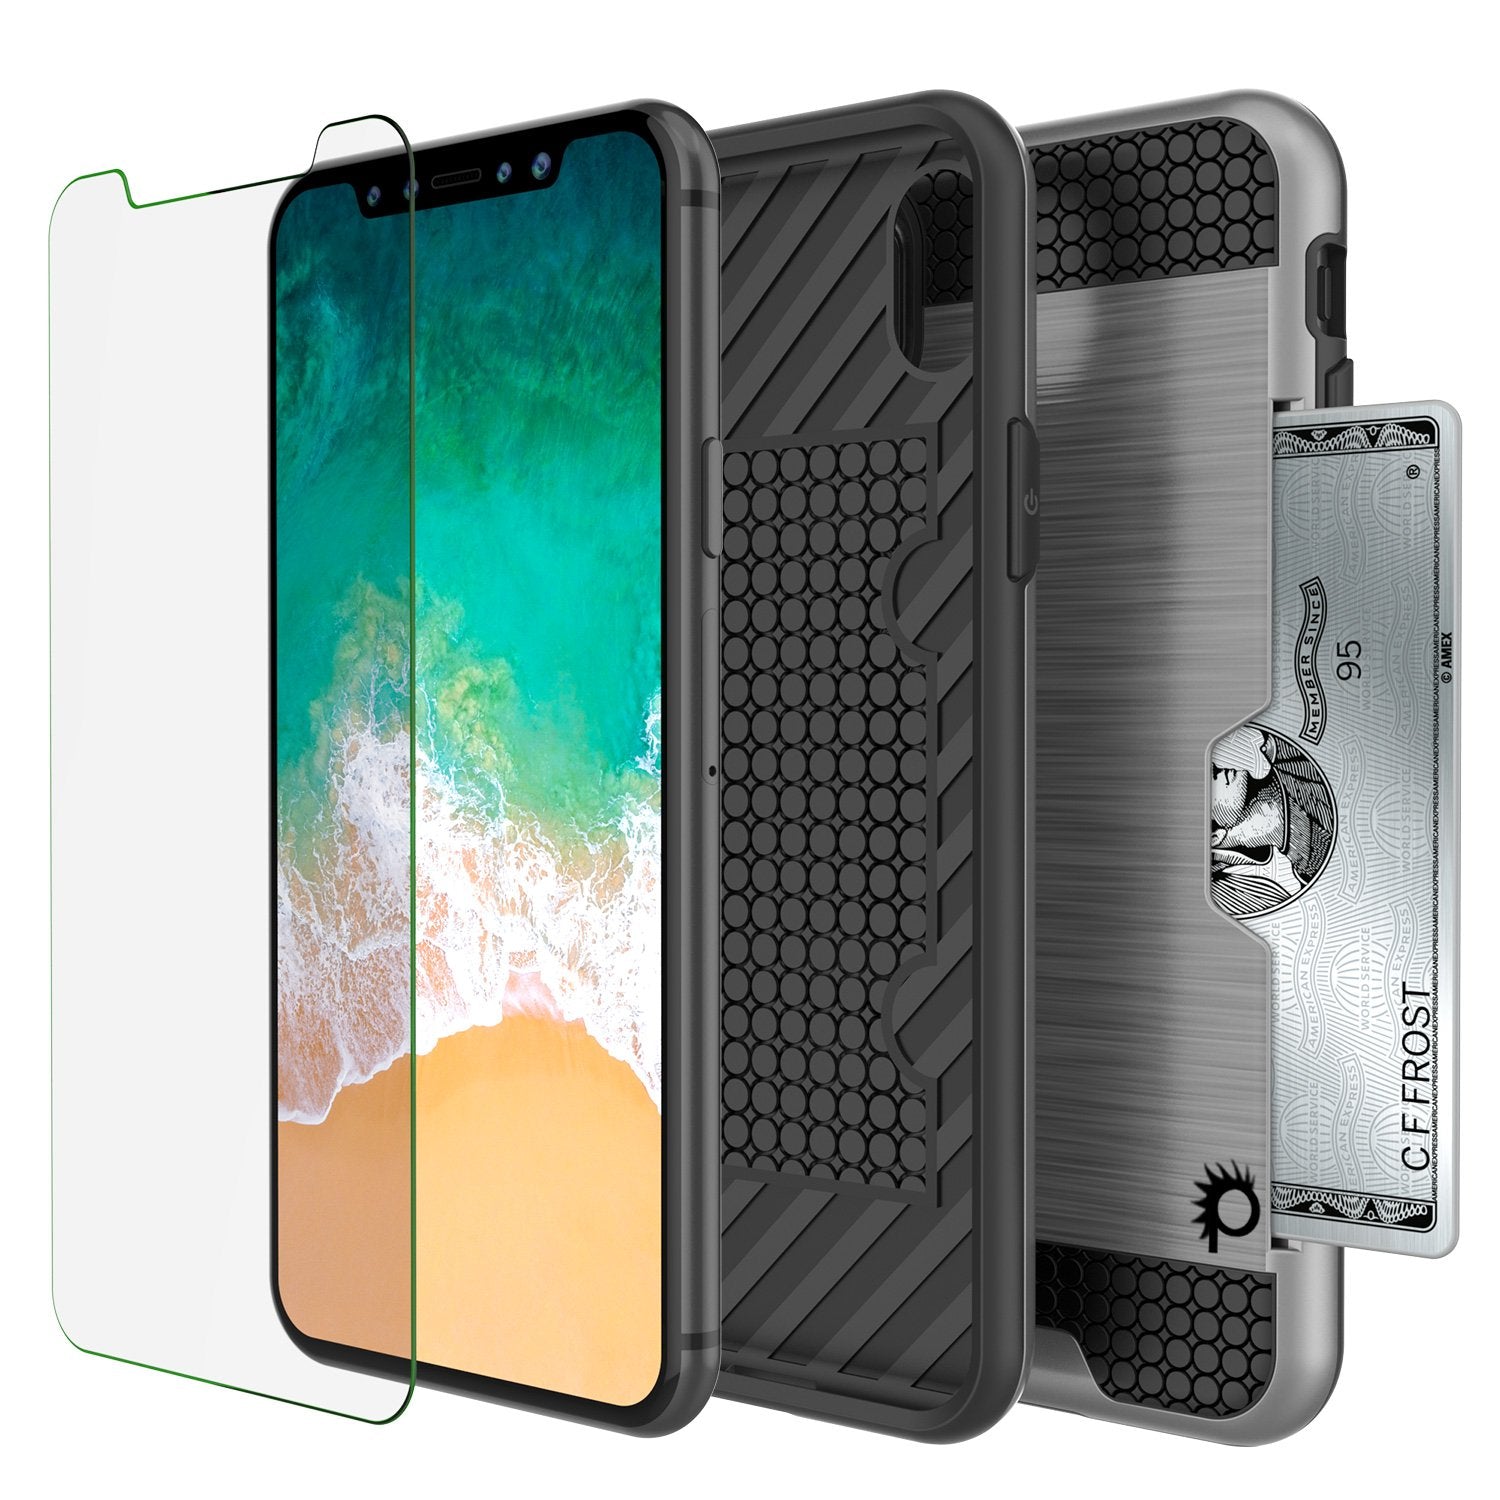 iPhone X Case, PUNKcase [SLOT Series] Slim Fit Dual-Layer Armor Cover & Tempered Glass PUNKSHIELD Screen Protector for Apple iPhone X [Silver] - PunkCase NZ